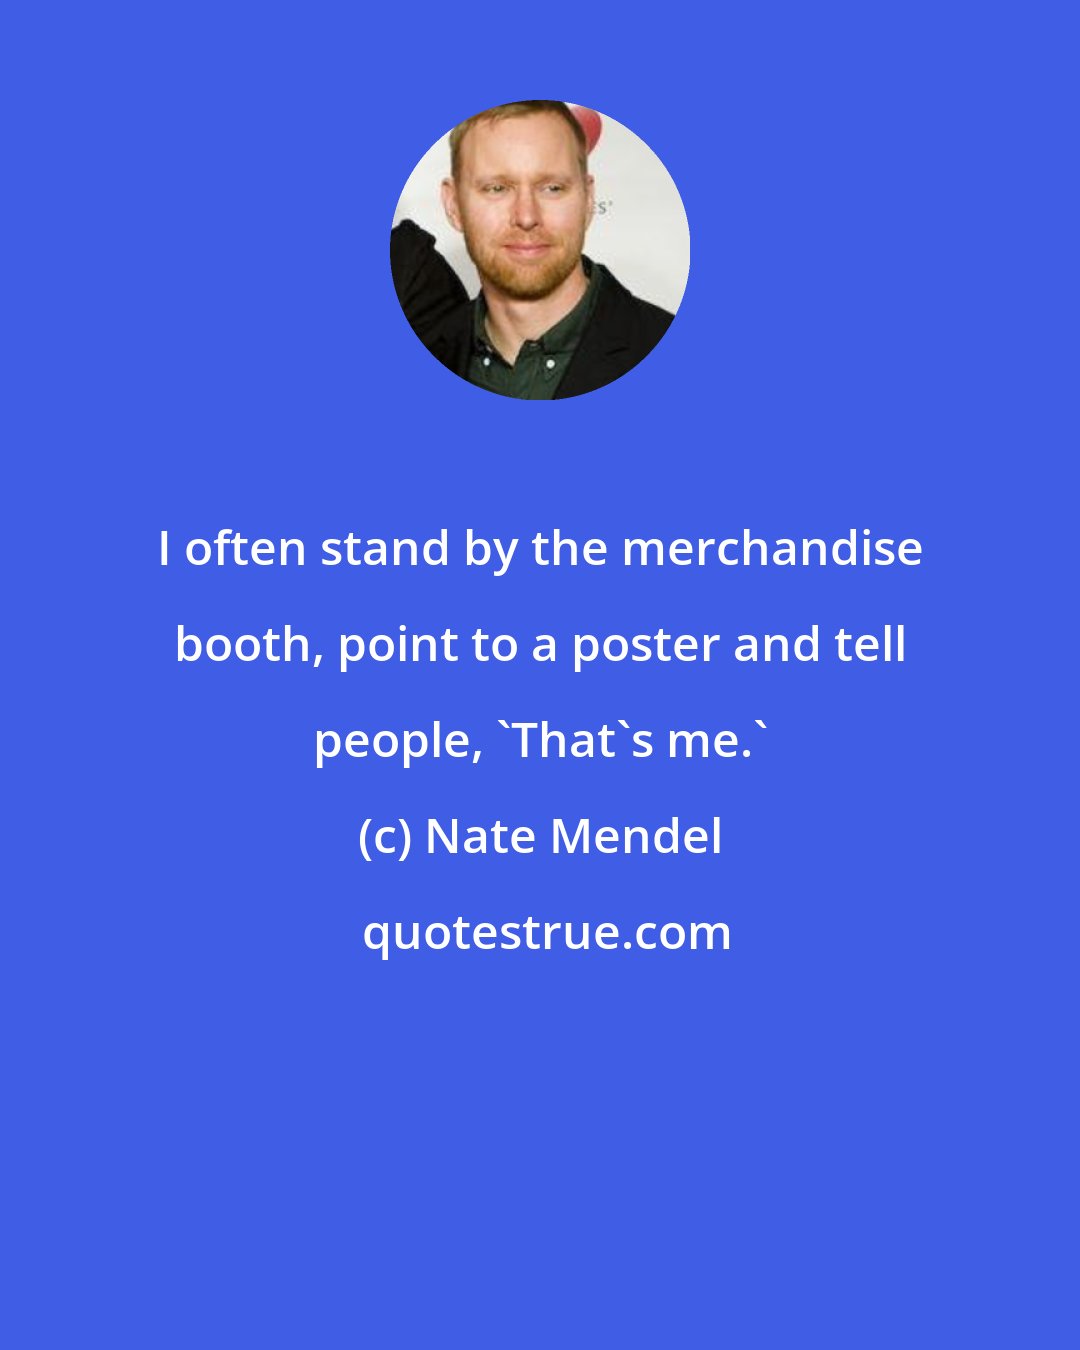 Nate Mendel: I often stand by the merchandise booth, point to a poster and tell people, 'That's me.'